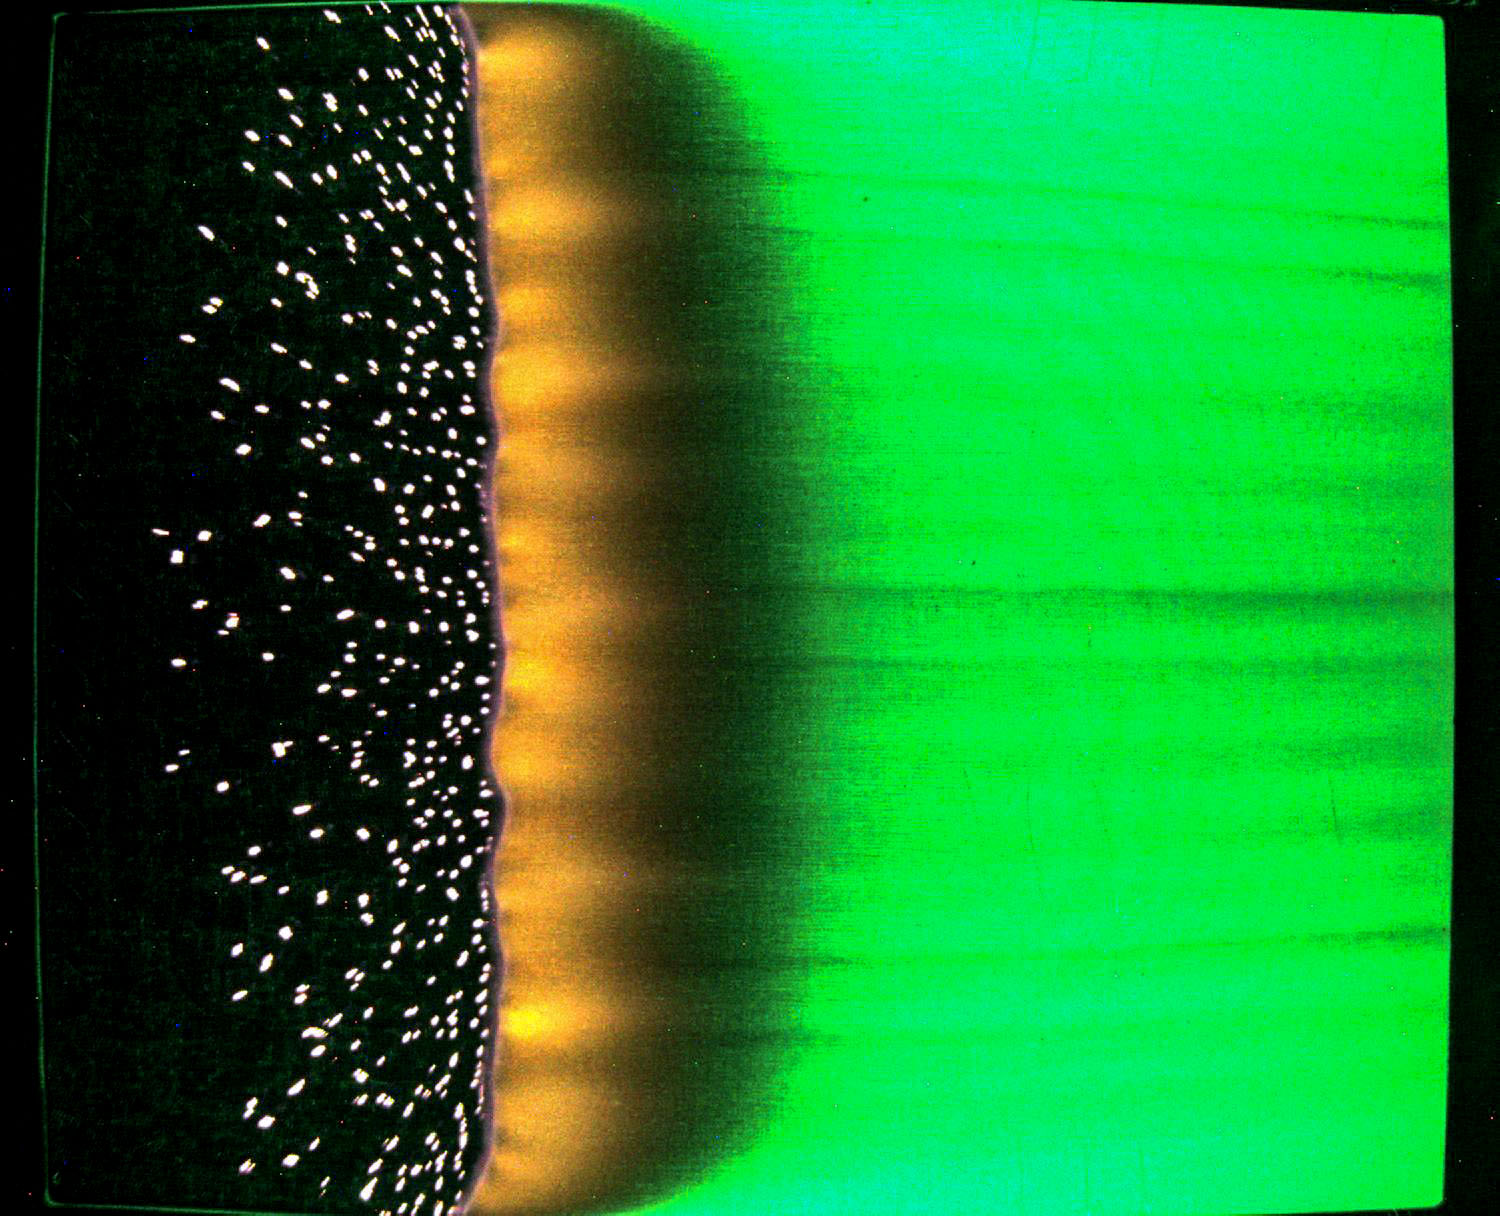 A sample of fabric made of cotton and fiberglass burns in this image illuminated by green LED lights. An orange flame covers the image from top to bottom and a black region to the right of the flame is the cotton in the sample beginning to heat and char. Bright specks to the left of the flame are from cotton that continues to smolder after the flame has passed.